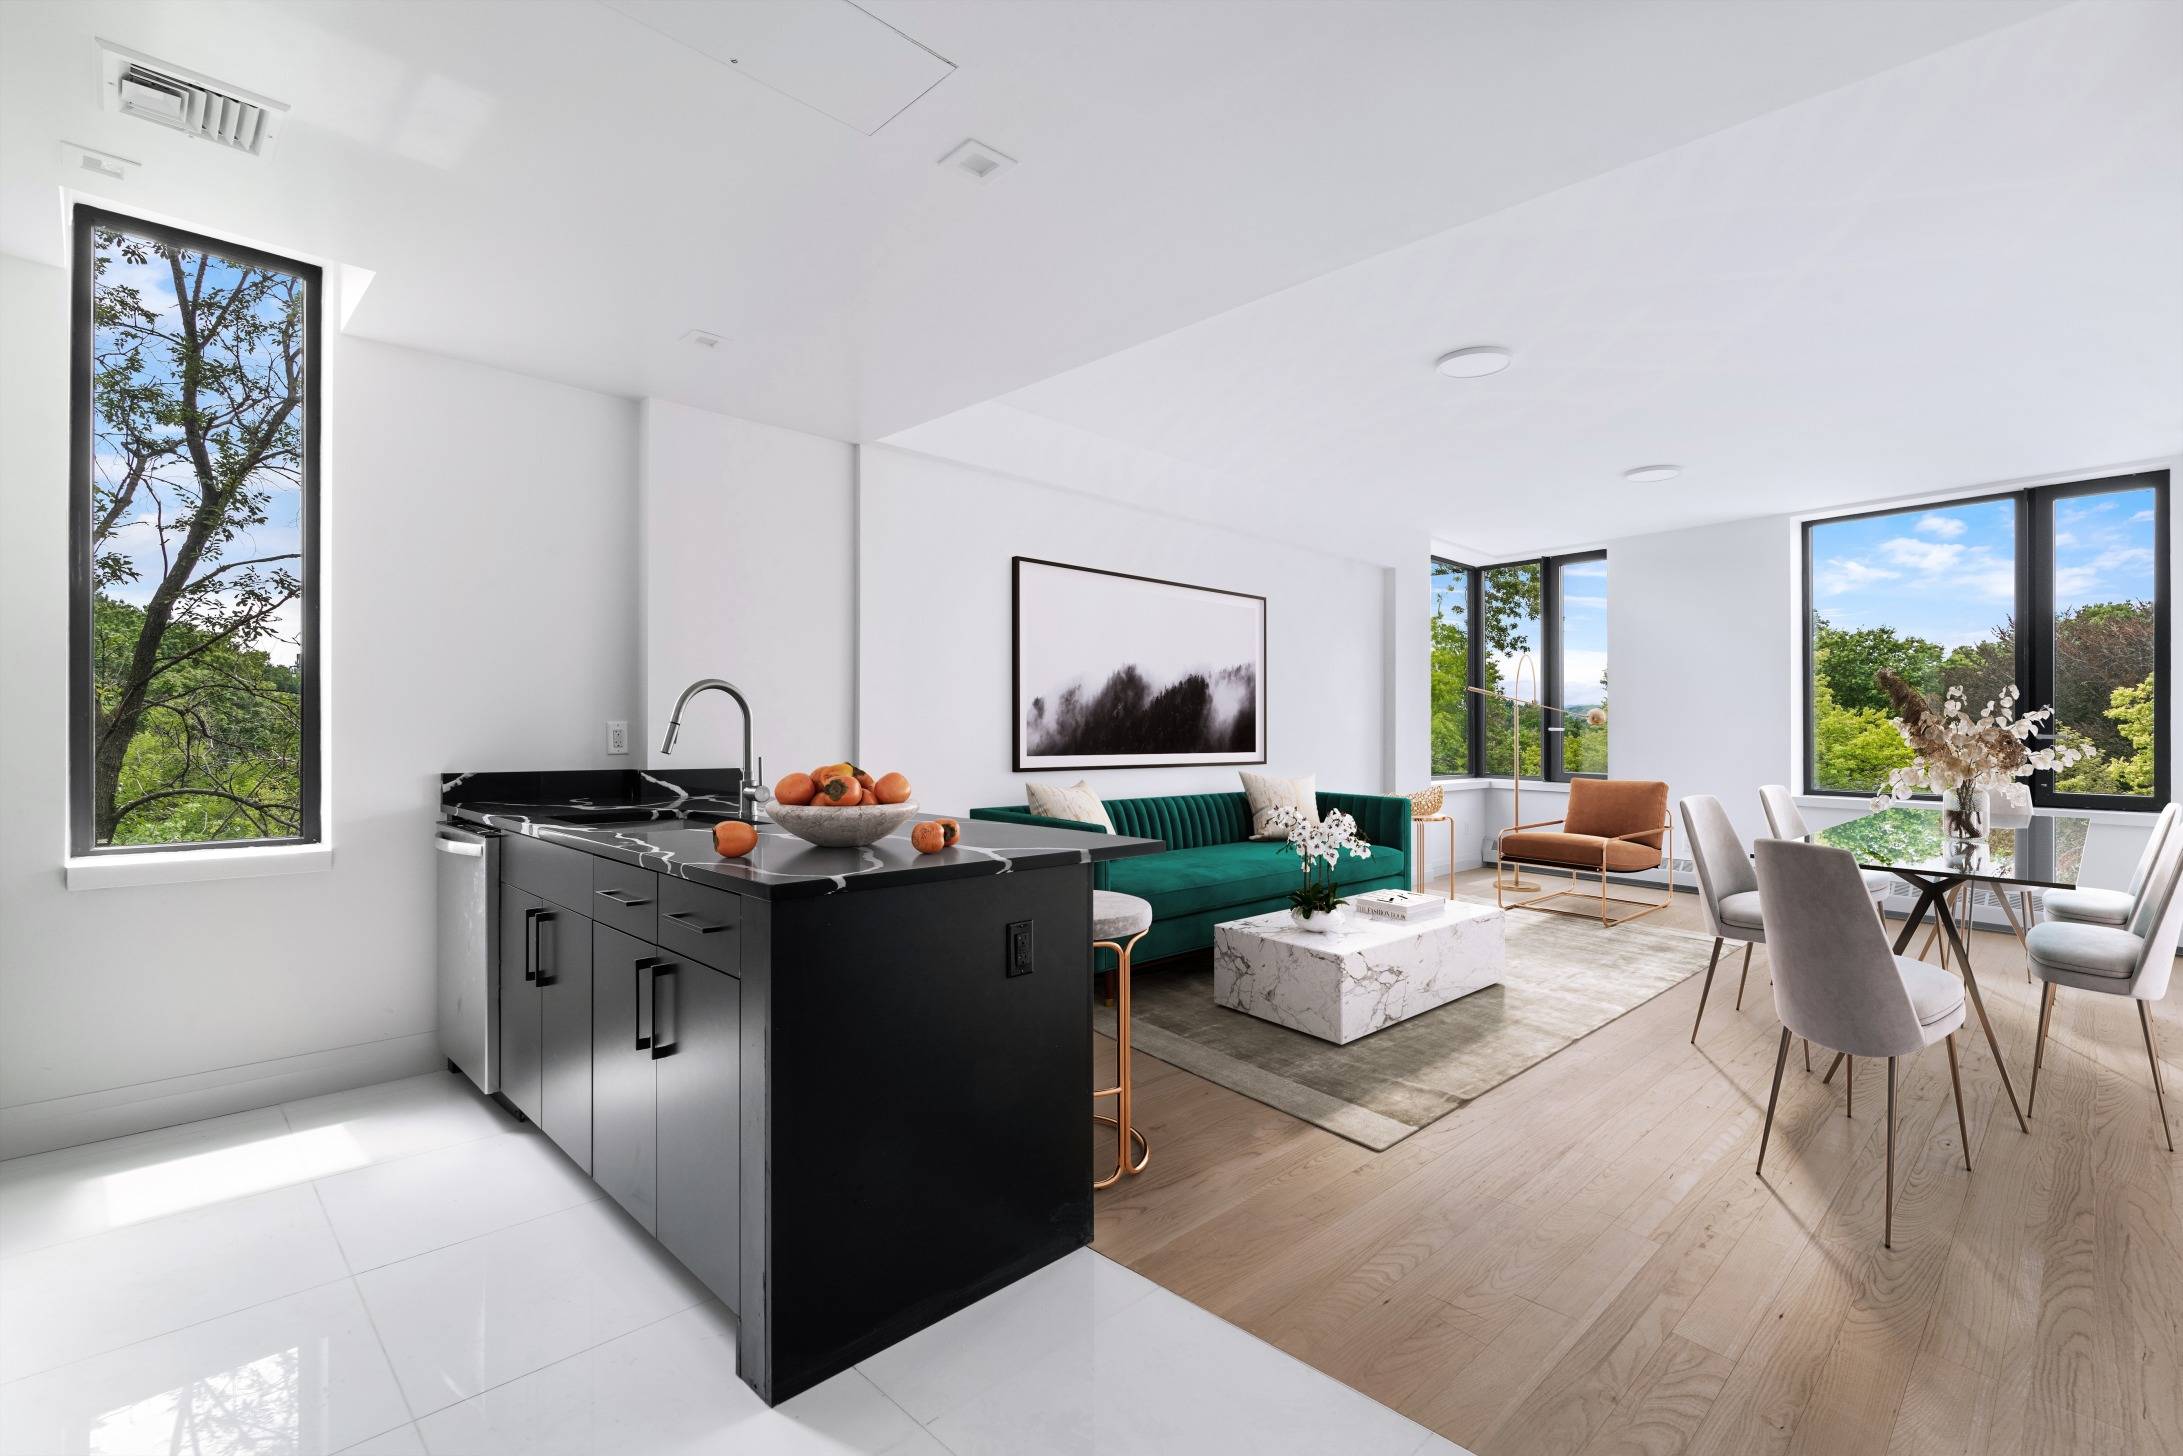 Thirty1 Twenty8 Henry Hudson Parkway designed by C3D Architecture is a limited collection of modern residences conveniently located in the Riverdale section of the Bronx.